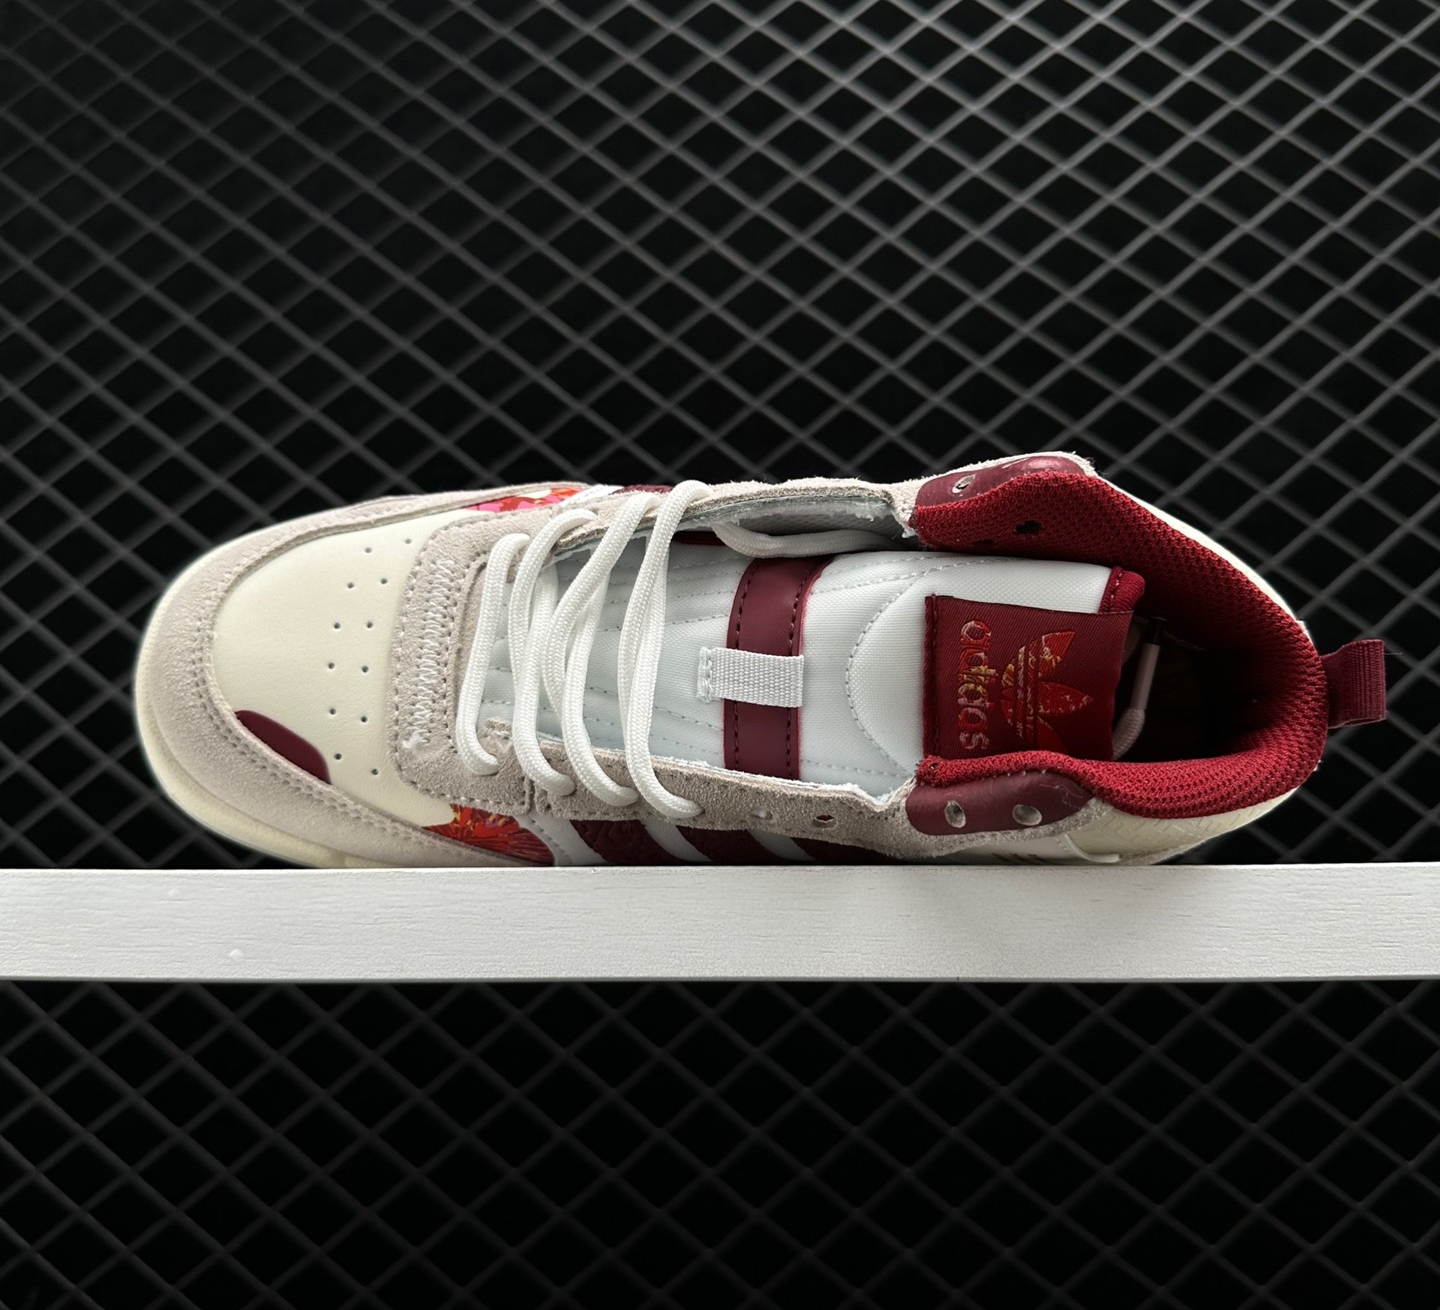 Adidas Originals Post Up 'Red White' IF2564 - Classic Style with a Modern Twist